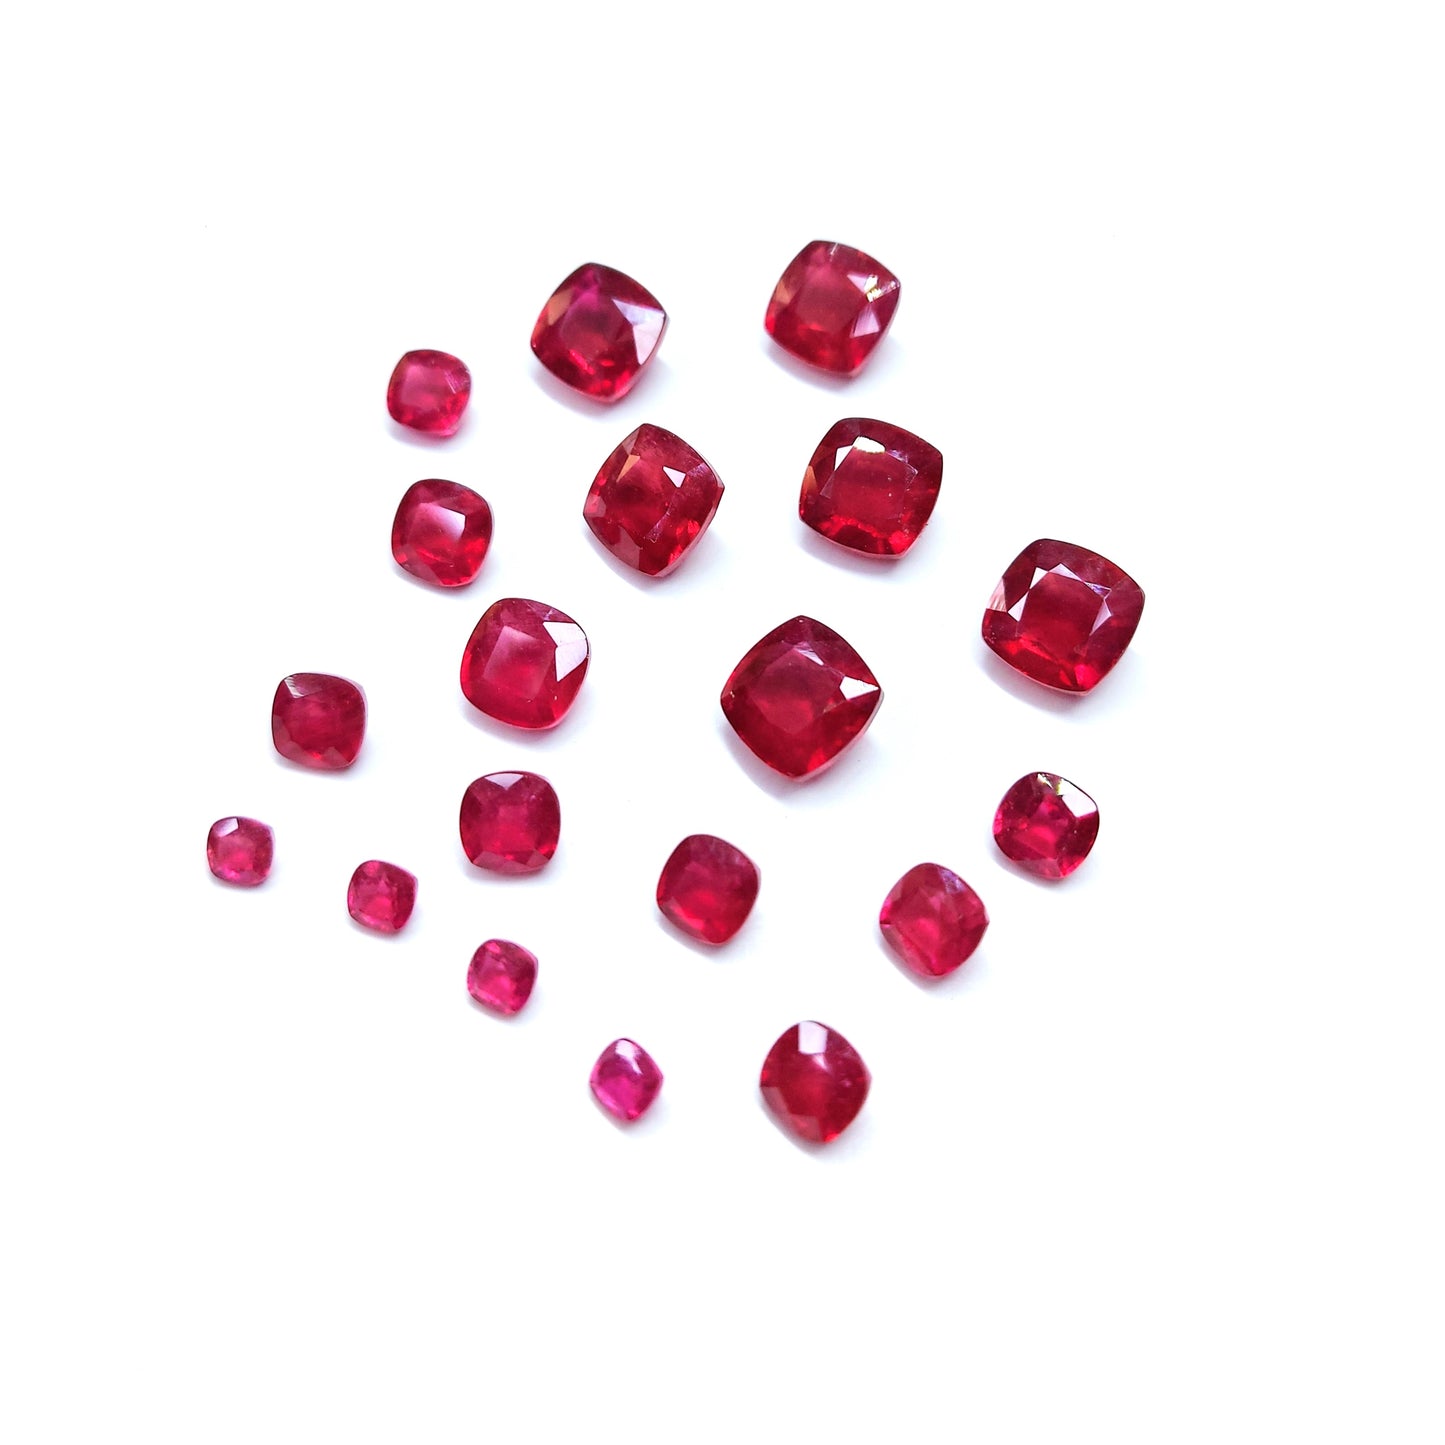 Natural Ruby Calibrated Fissure Filled Cushion